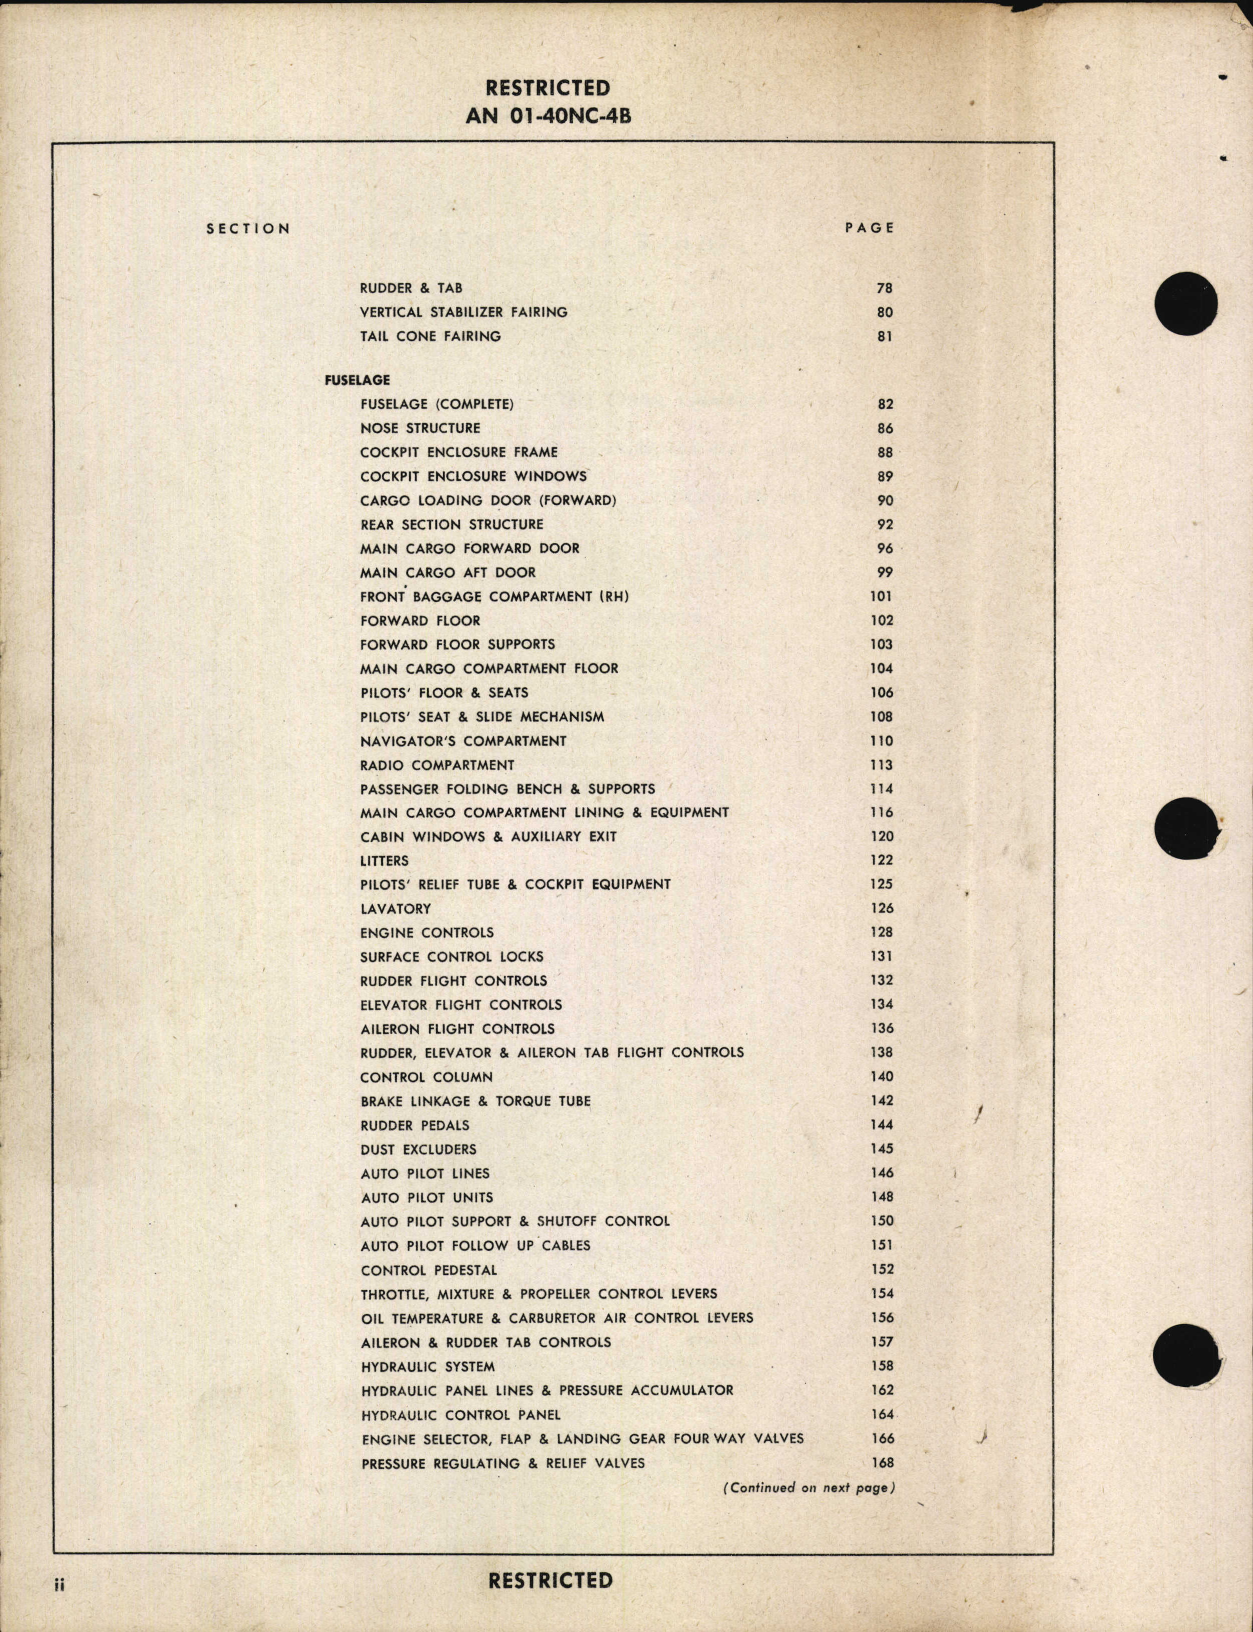 Sample page 6 from AirCorps Library document: Parts Catalog for C-47A and R4D-5